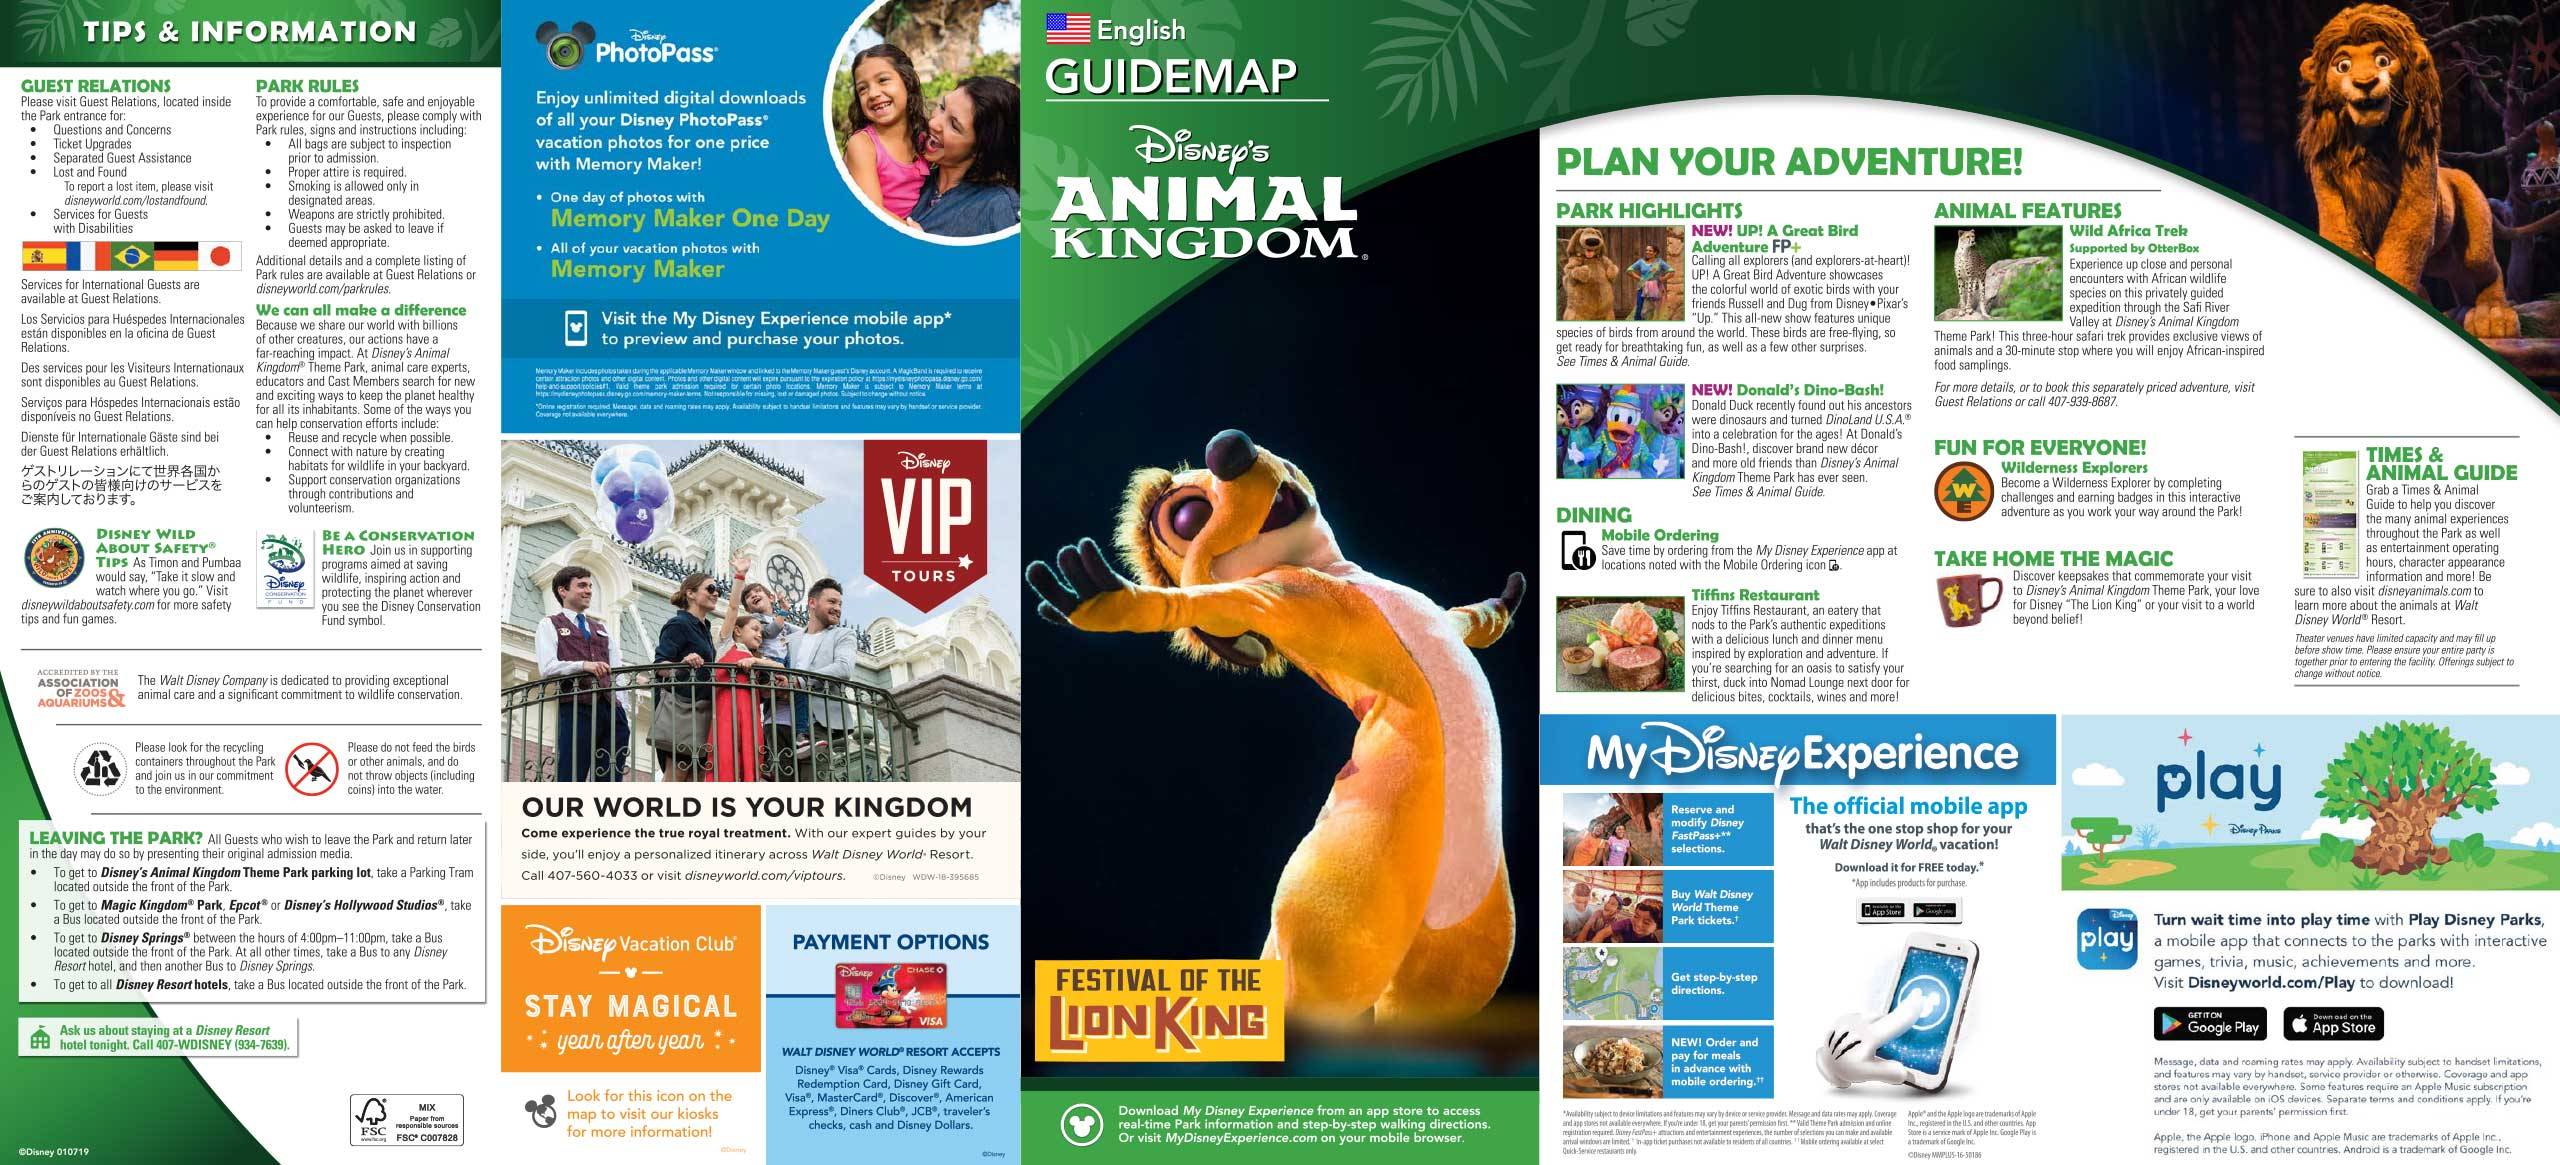 Disney's Animal Kingdom Guide Map January 2019 - Front